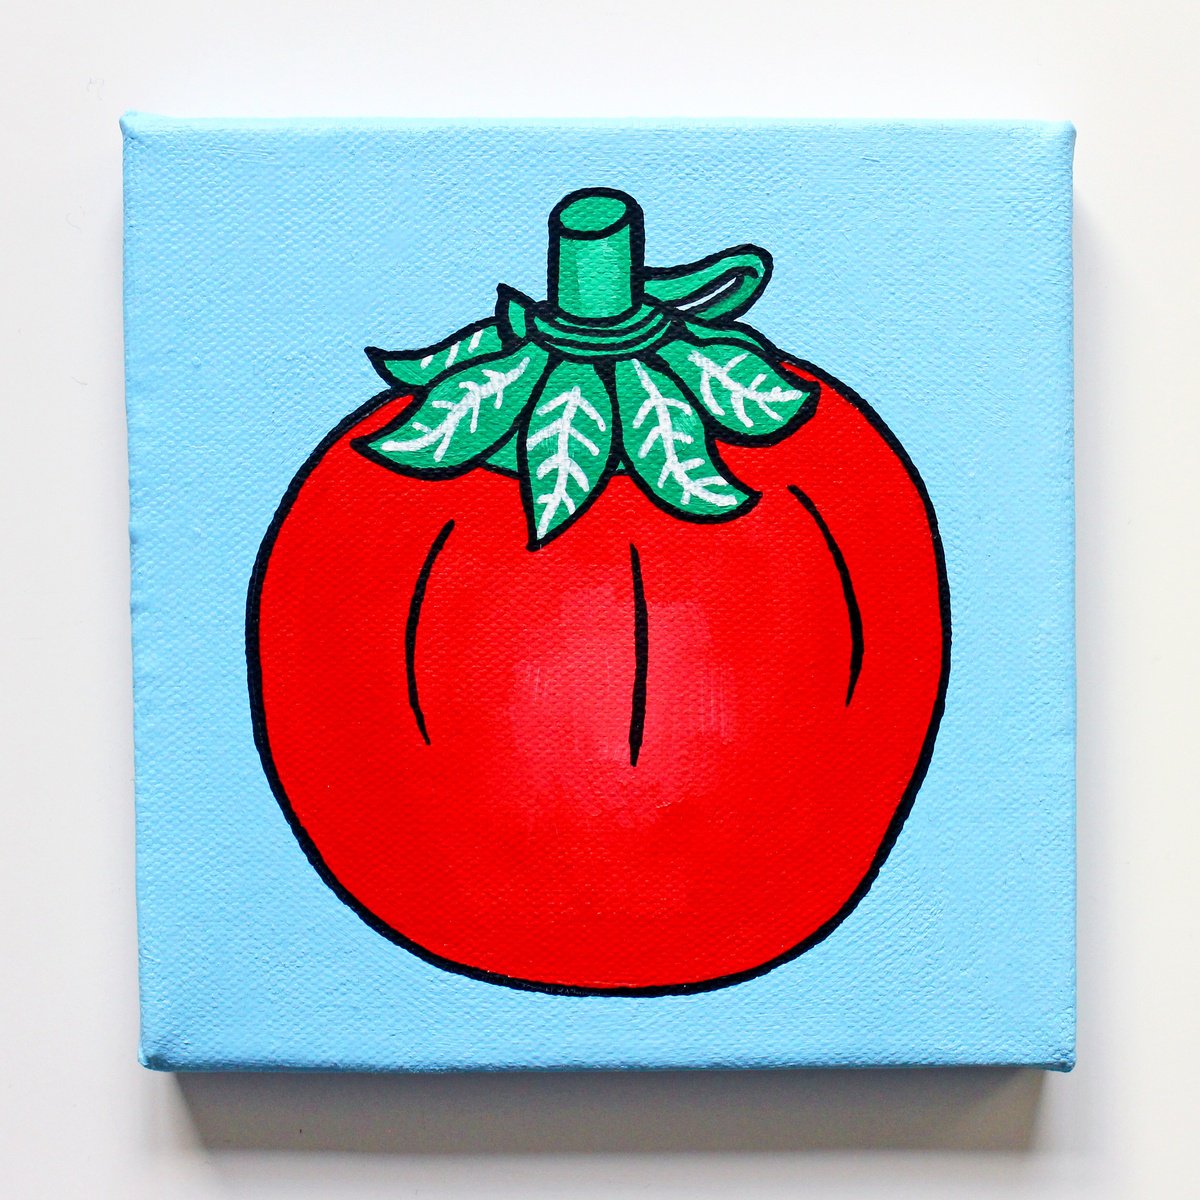 Tomato Ketchup Tomato-Shaped Bottle Pop Art Painting On Miniature Canvas by Ian Viggars